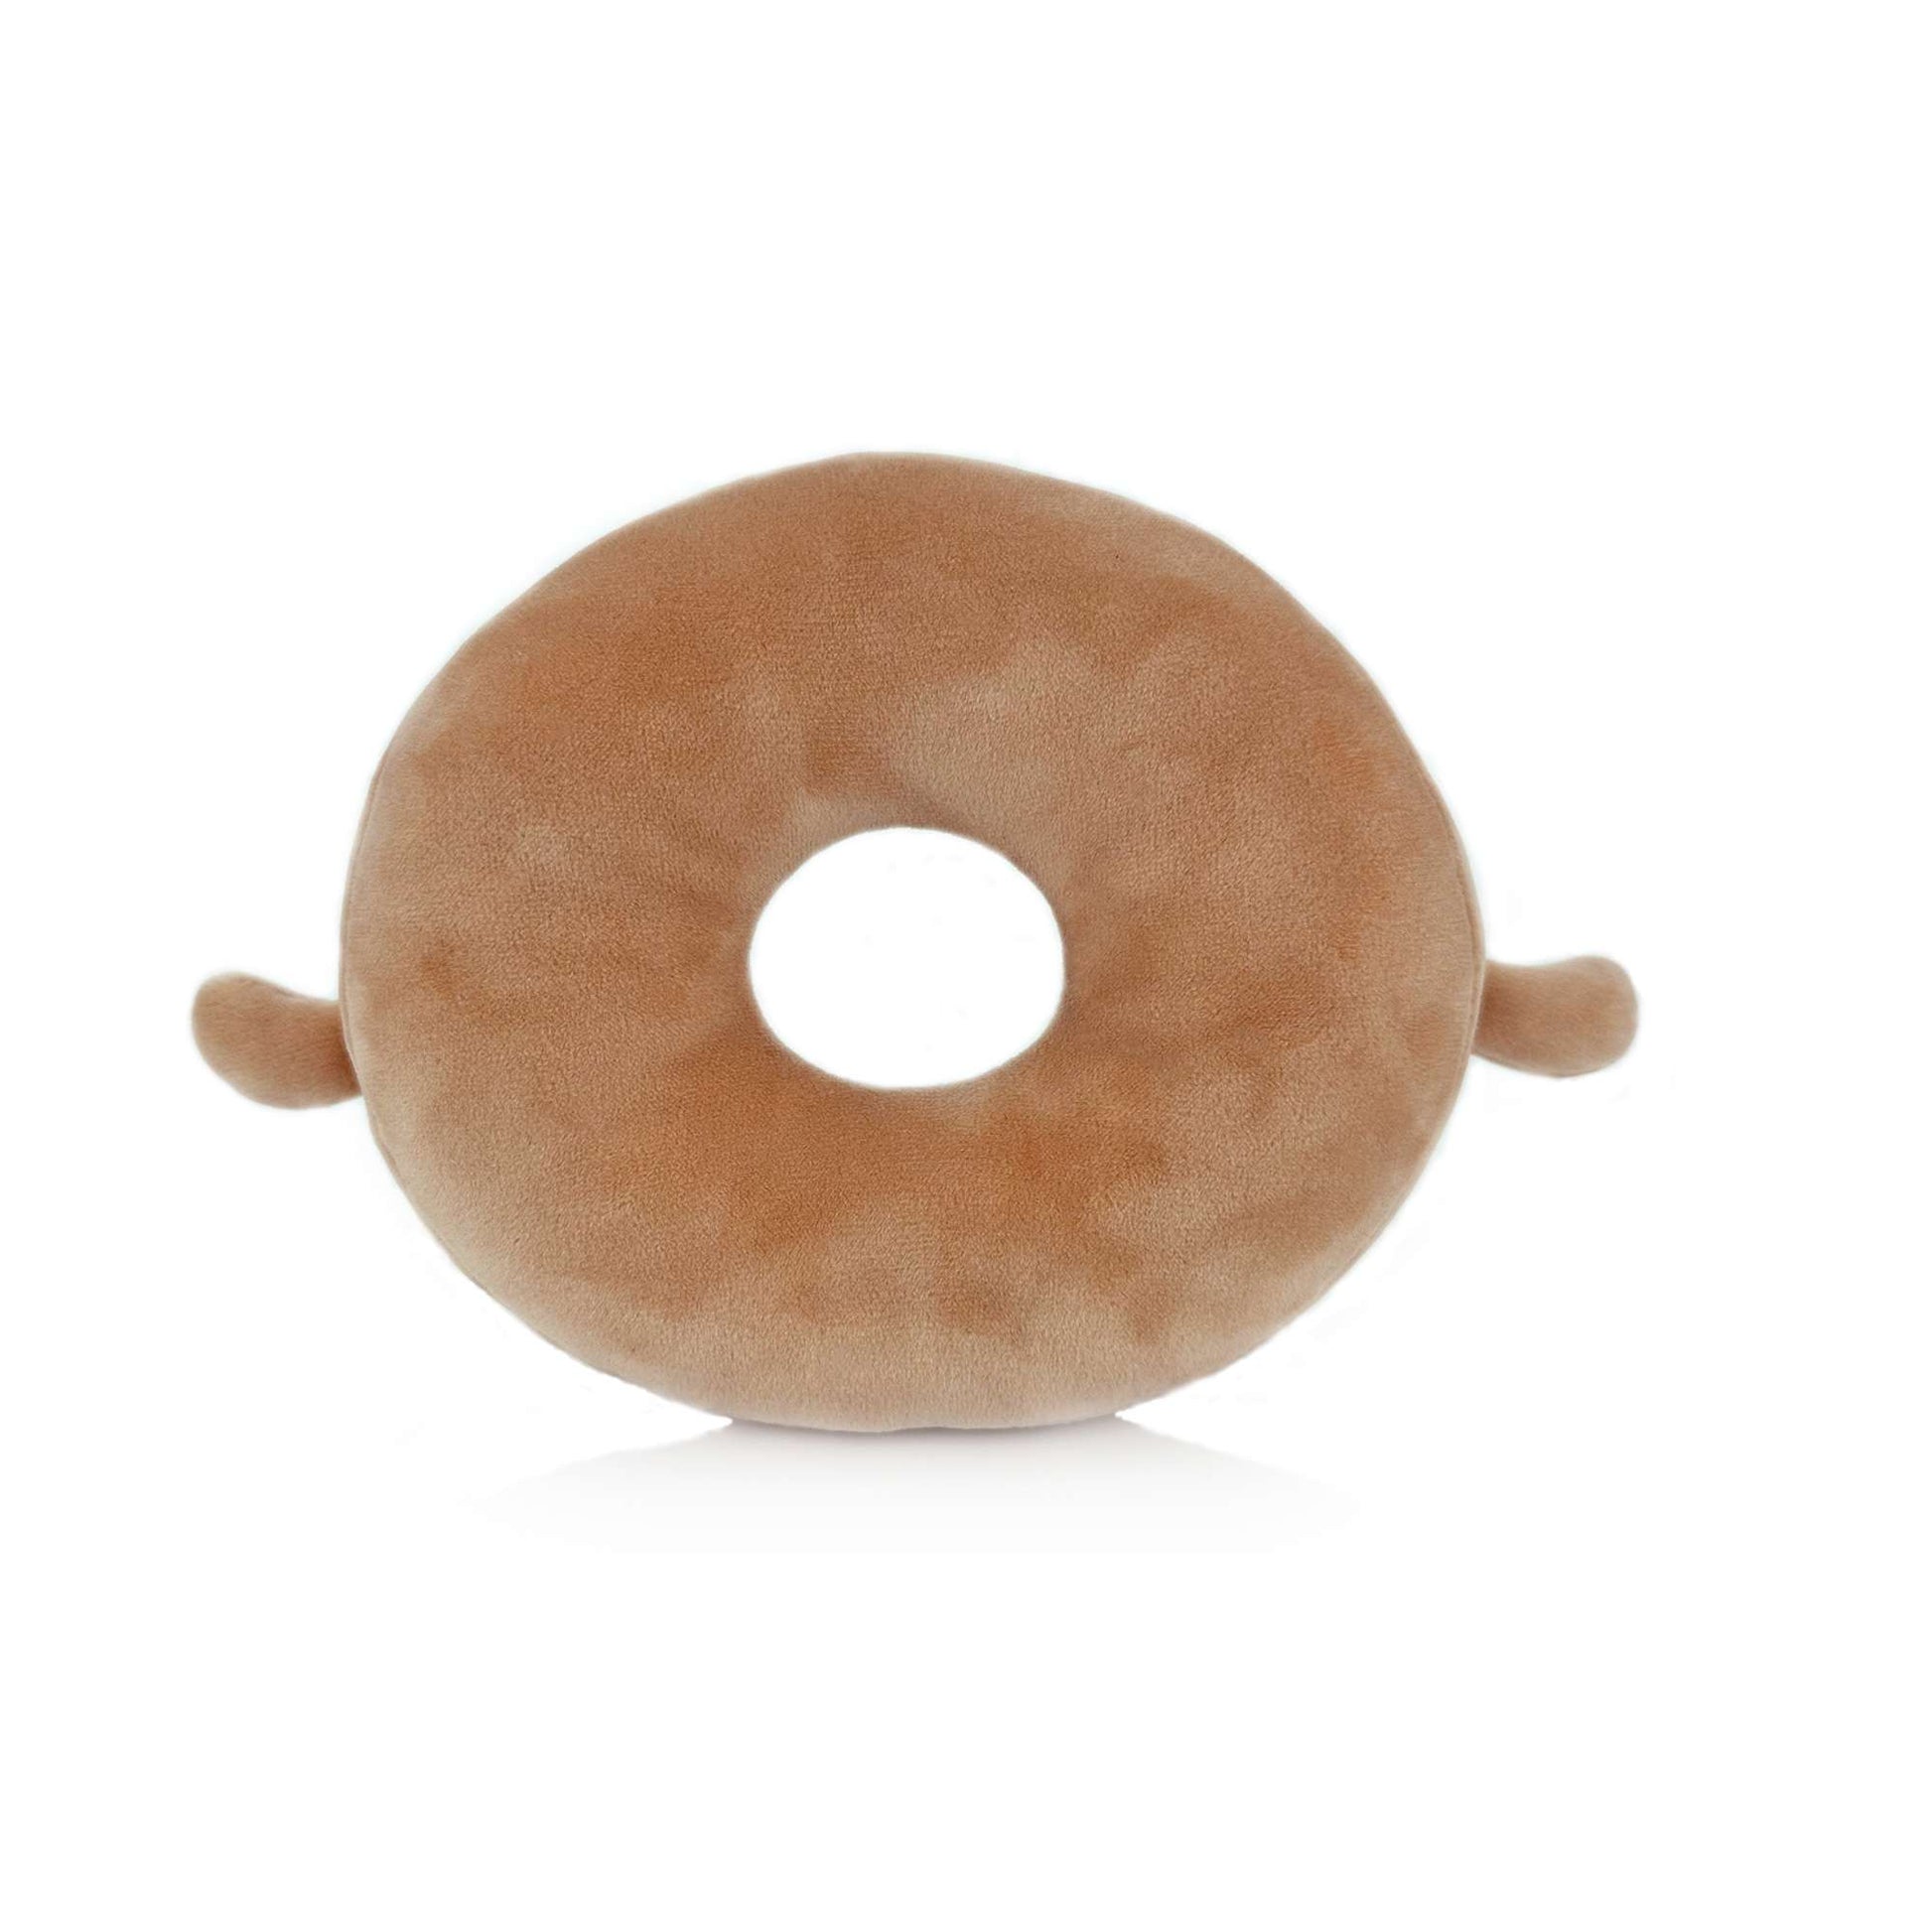 Back view of plush donut toy